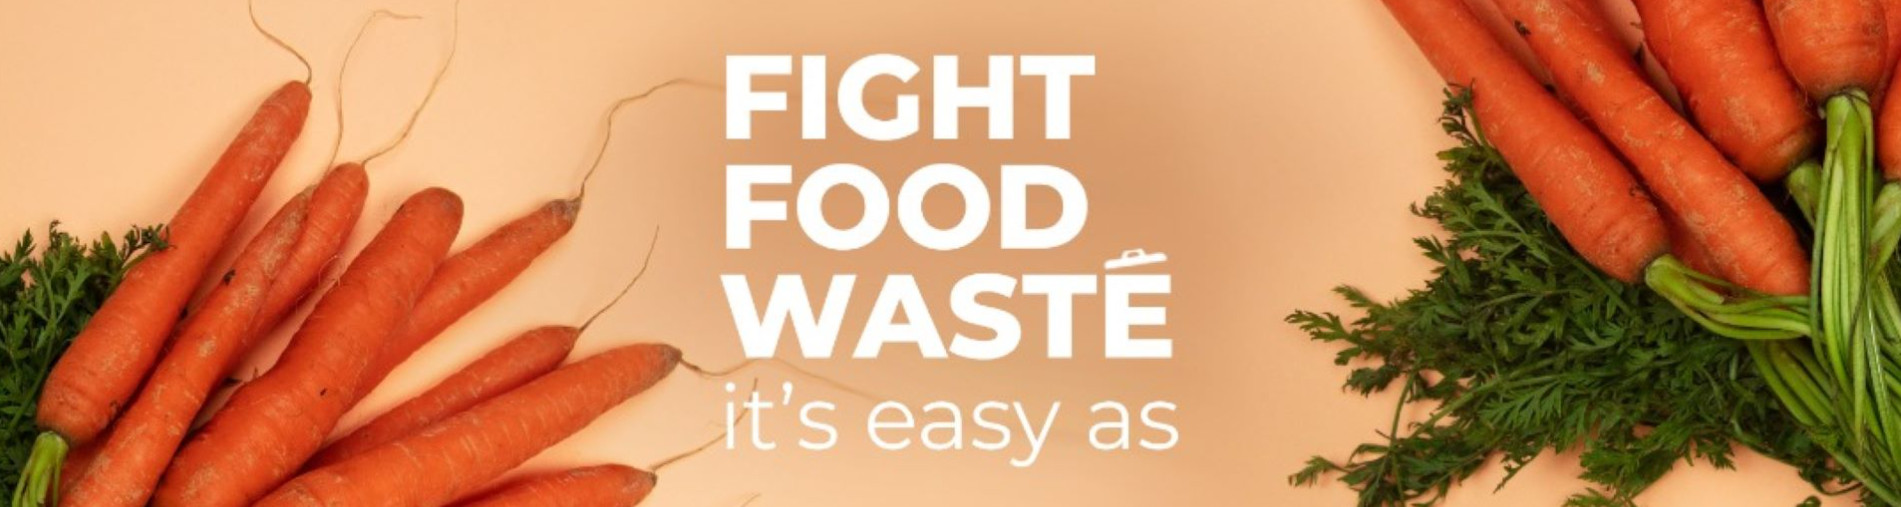 SAY NO TO FOOD WASTE